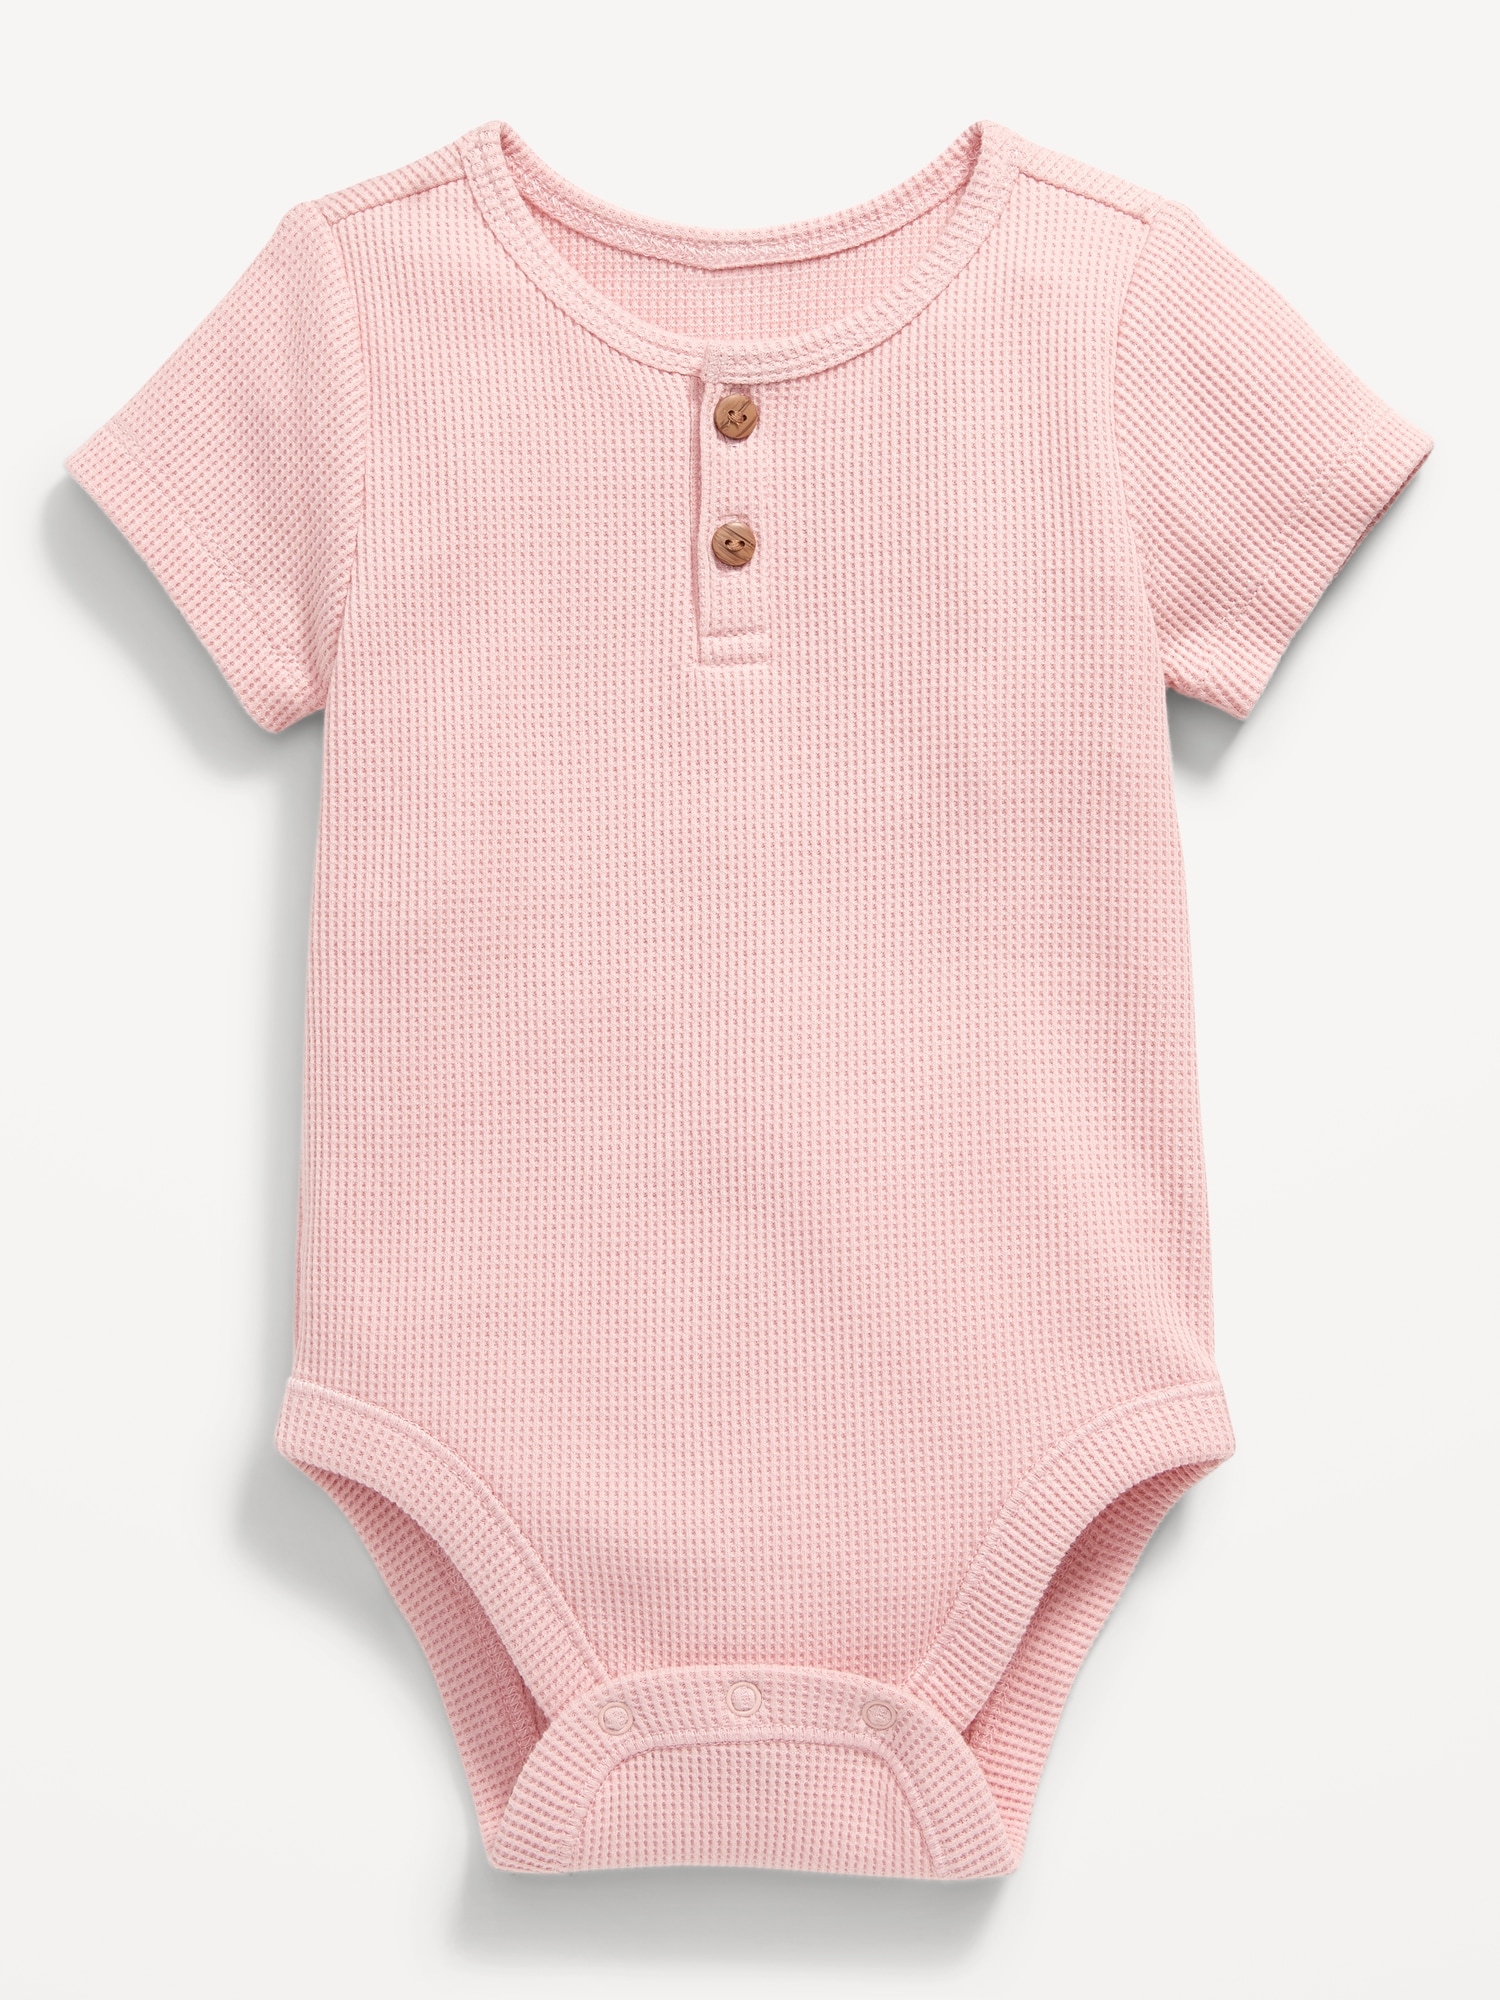 Unisex Thermal-Knit Henley Bodysuit for Baby Hot Deal